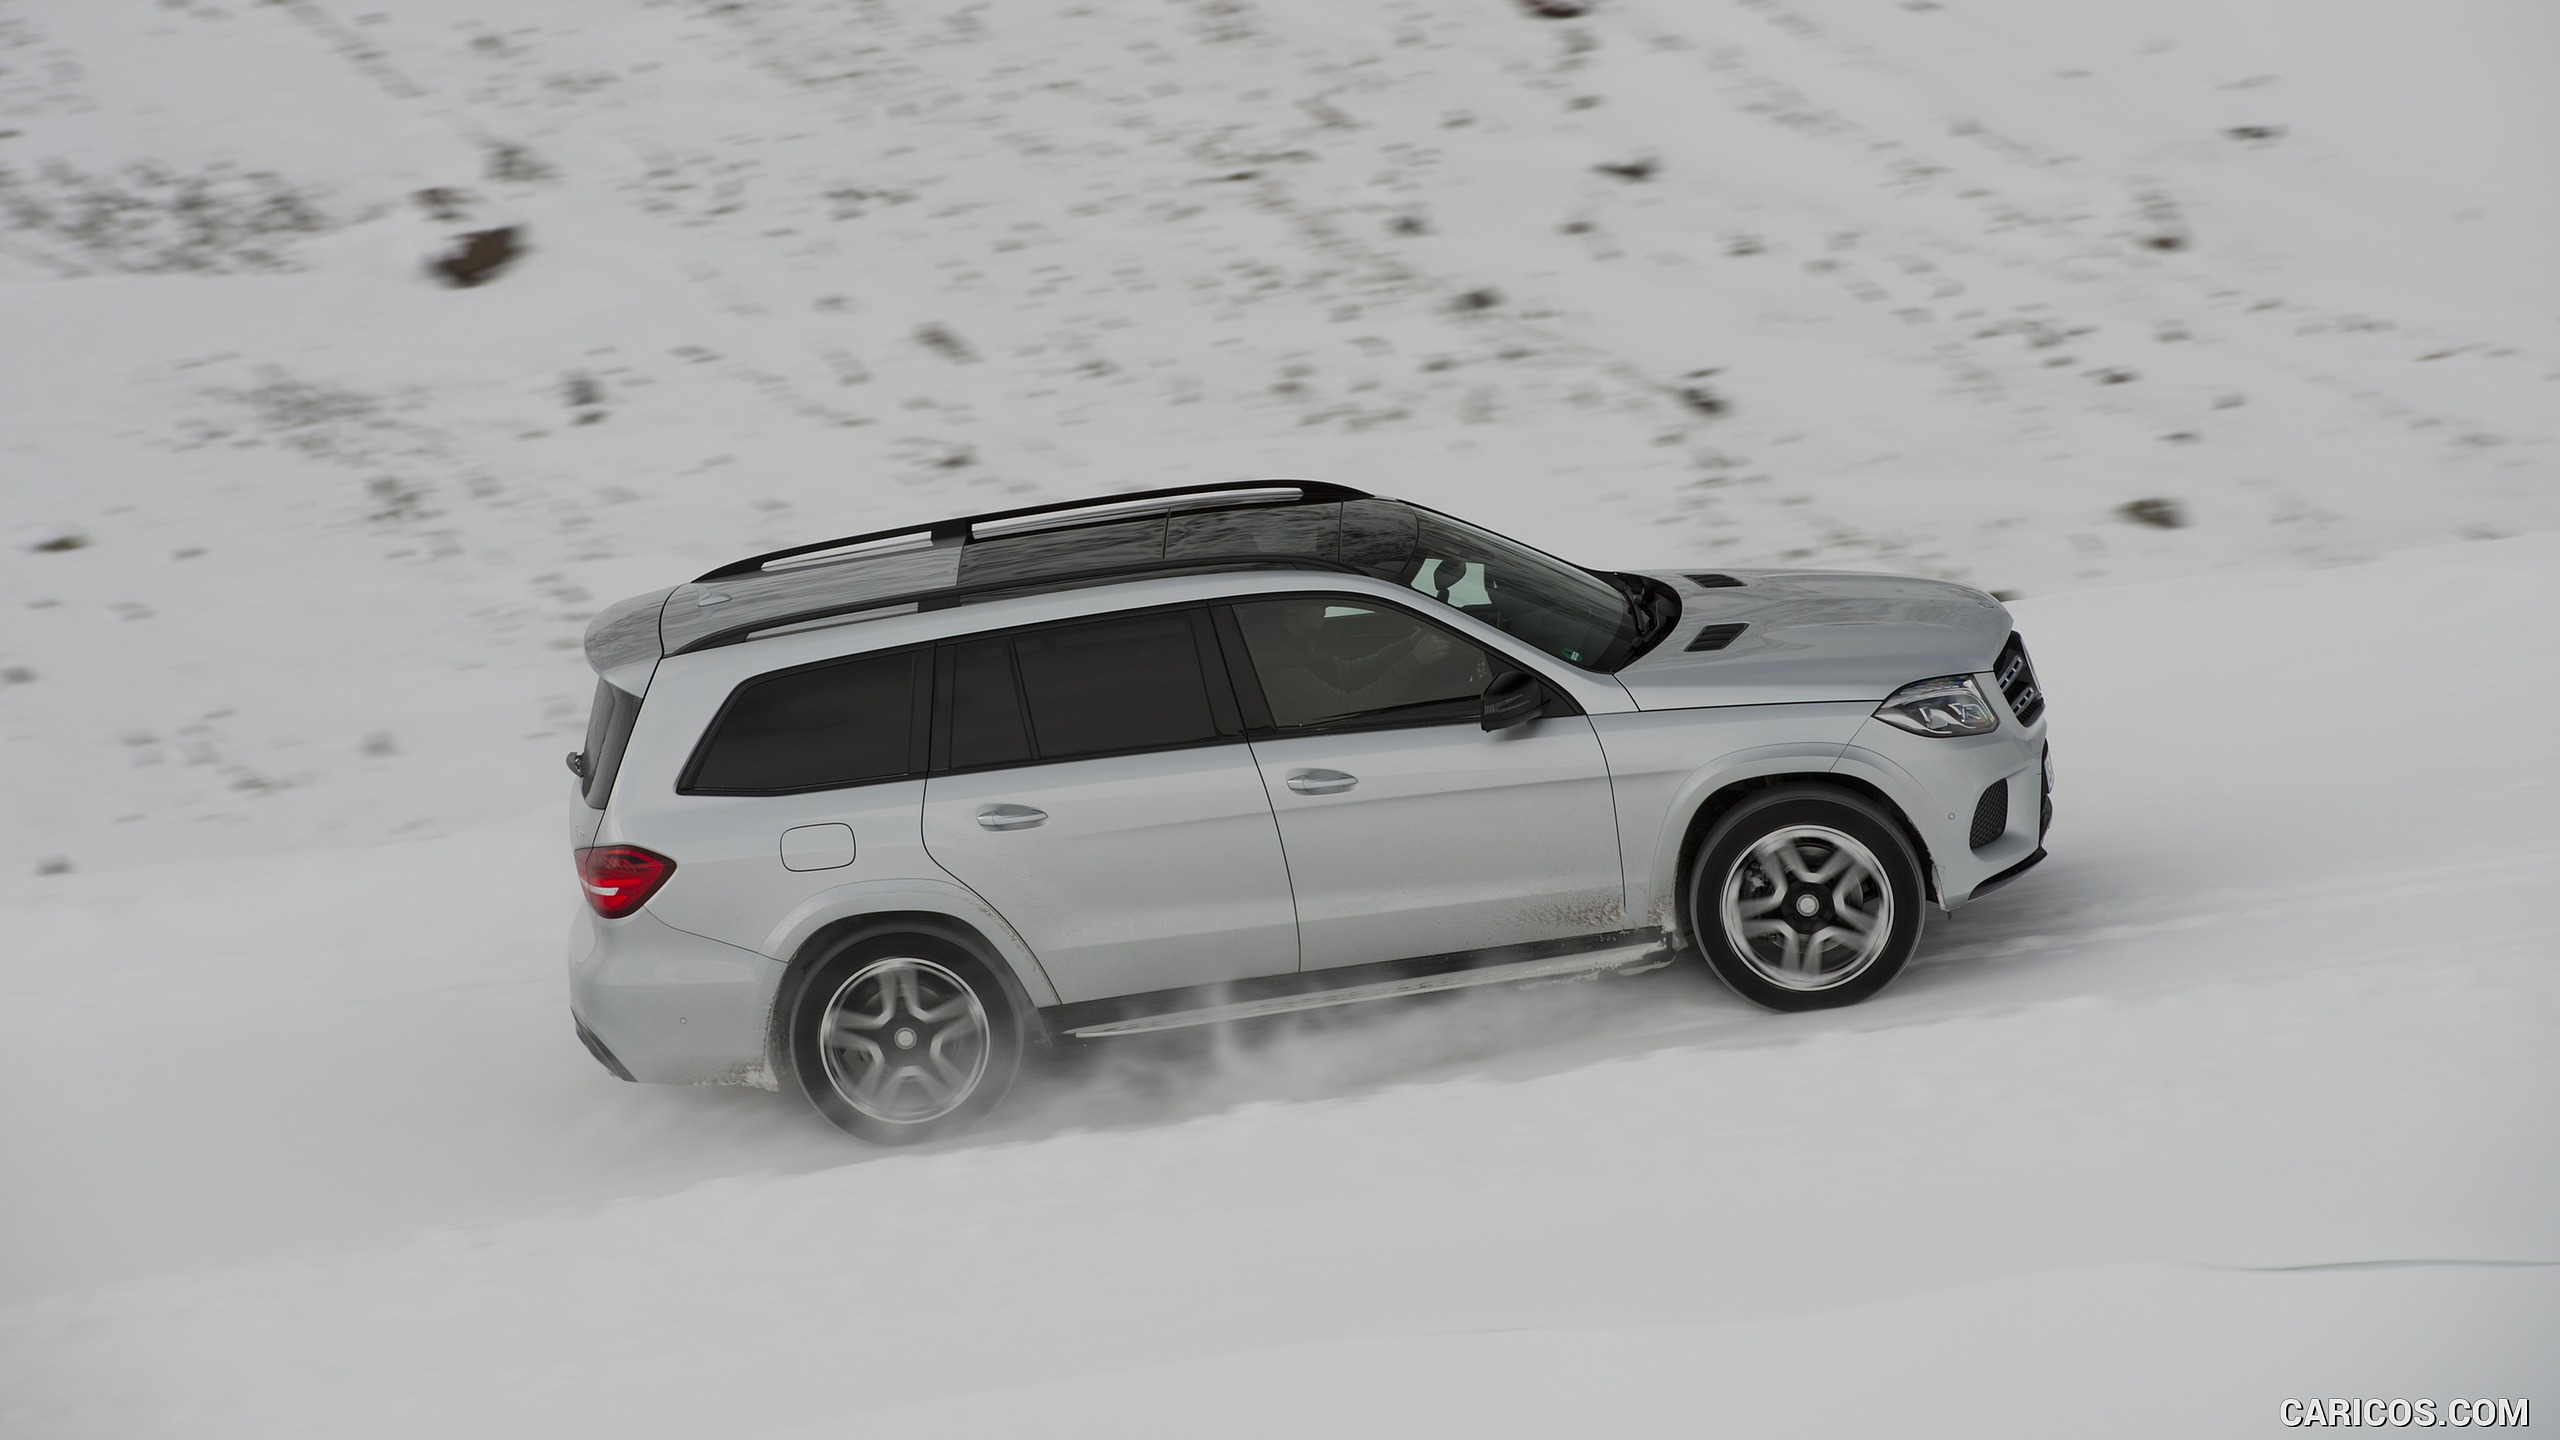 2017 Mercedes-Benz GLS 500 4MATIC AMG Line in Snow - Side, #153 of 255